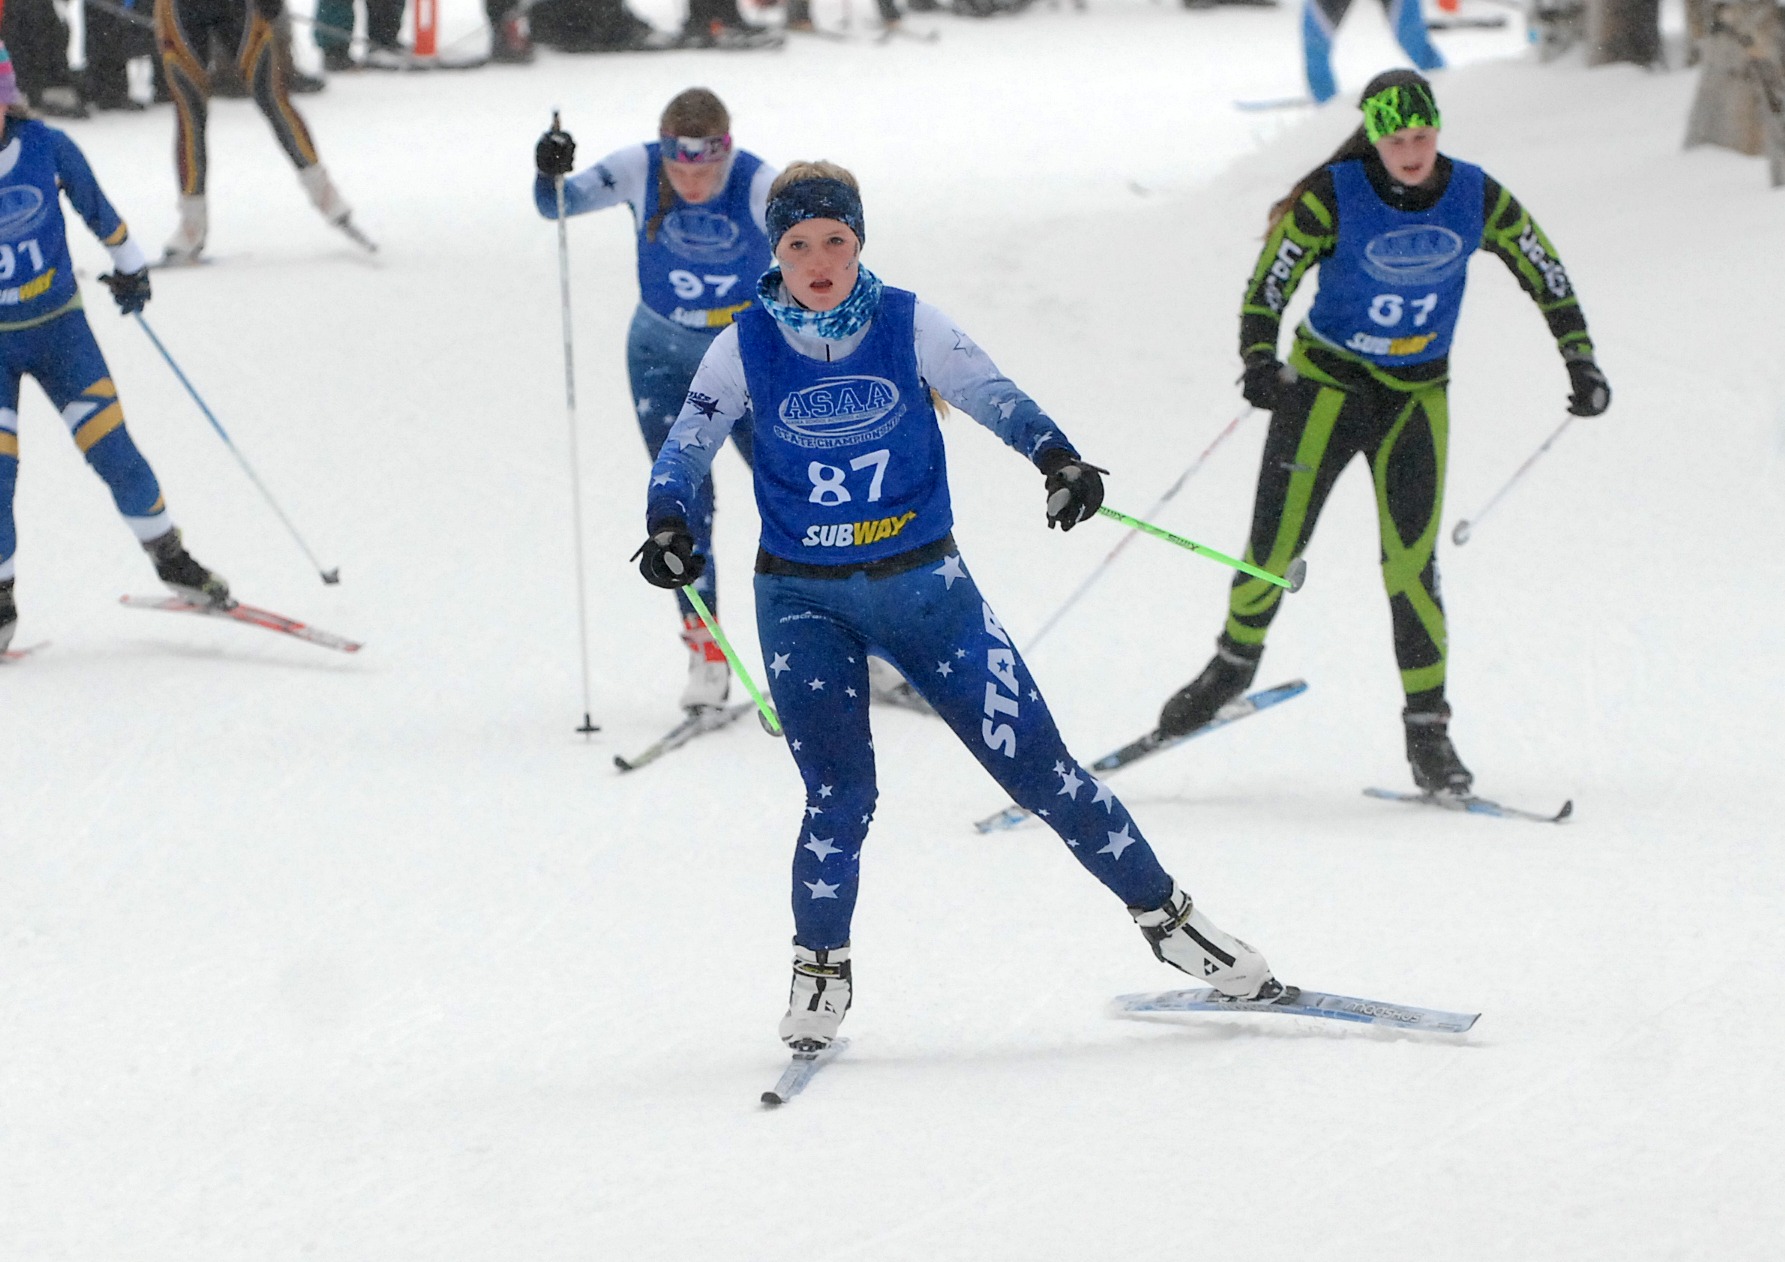 Soldotna’s Selby Hill races Friday at the state ski championships at Kincaid Park in Anchorage (Photo by Matt Tunseth/Alaska Star)